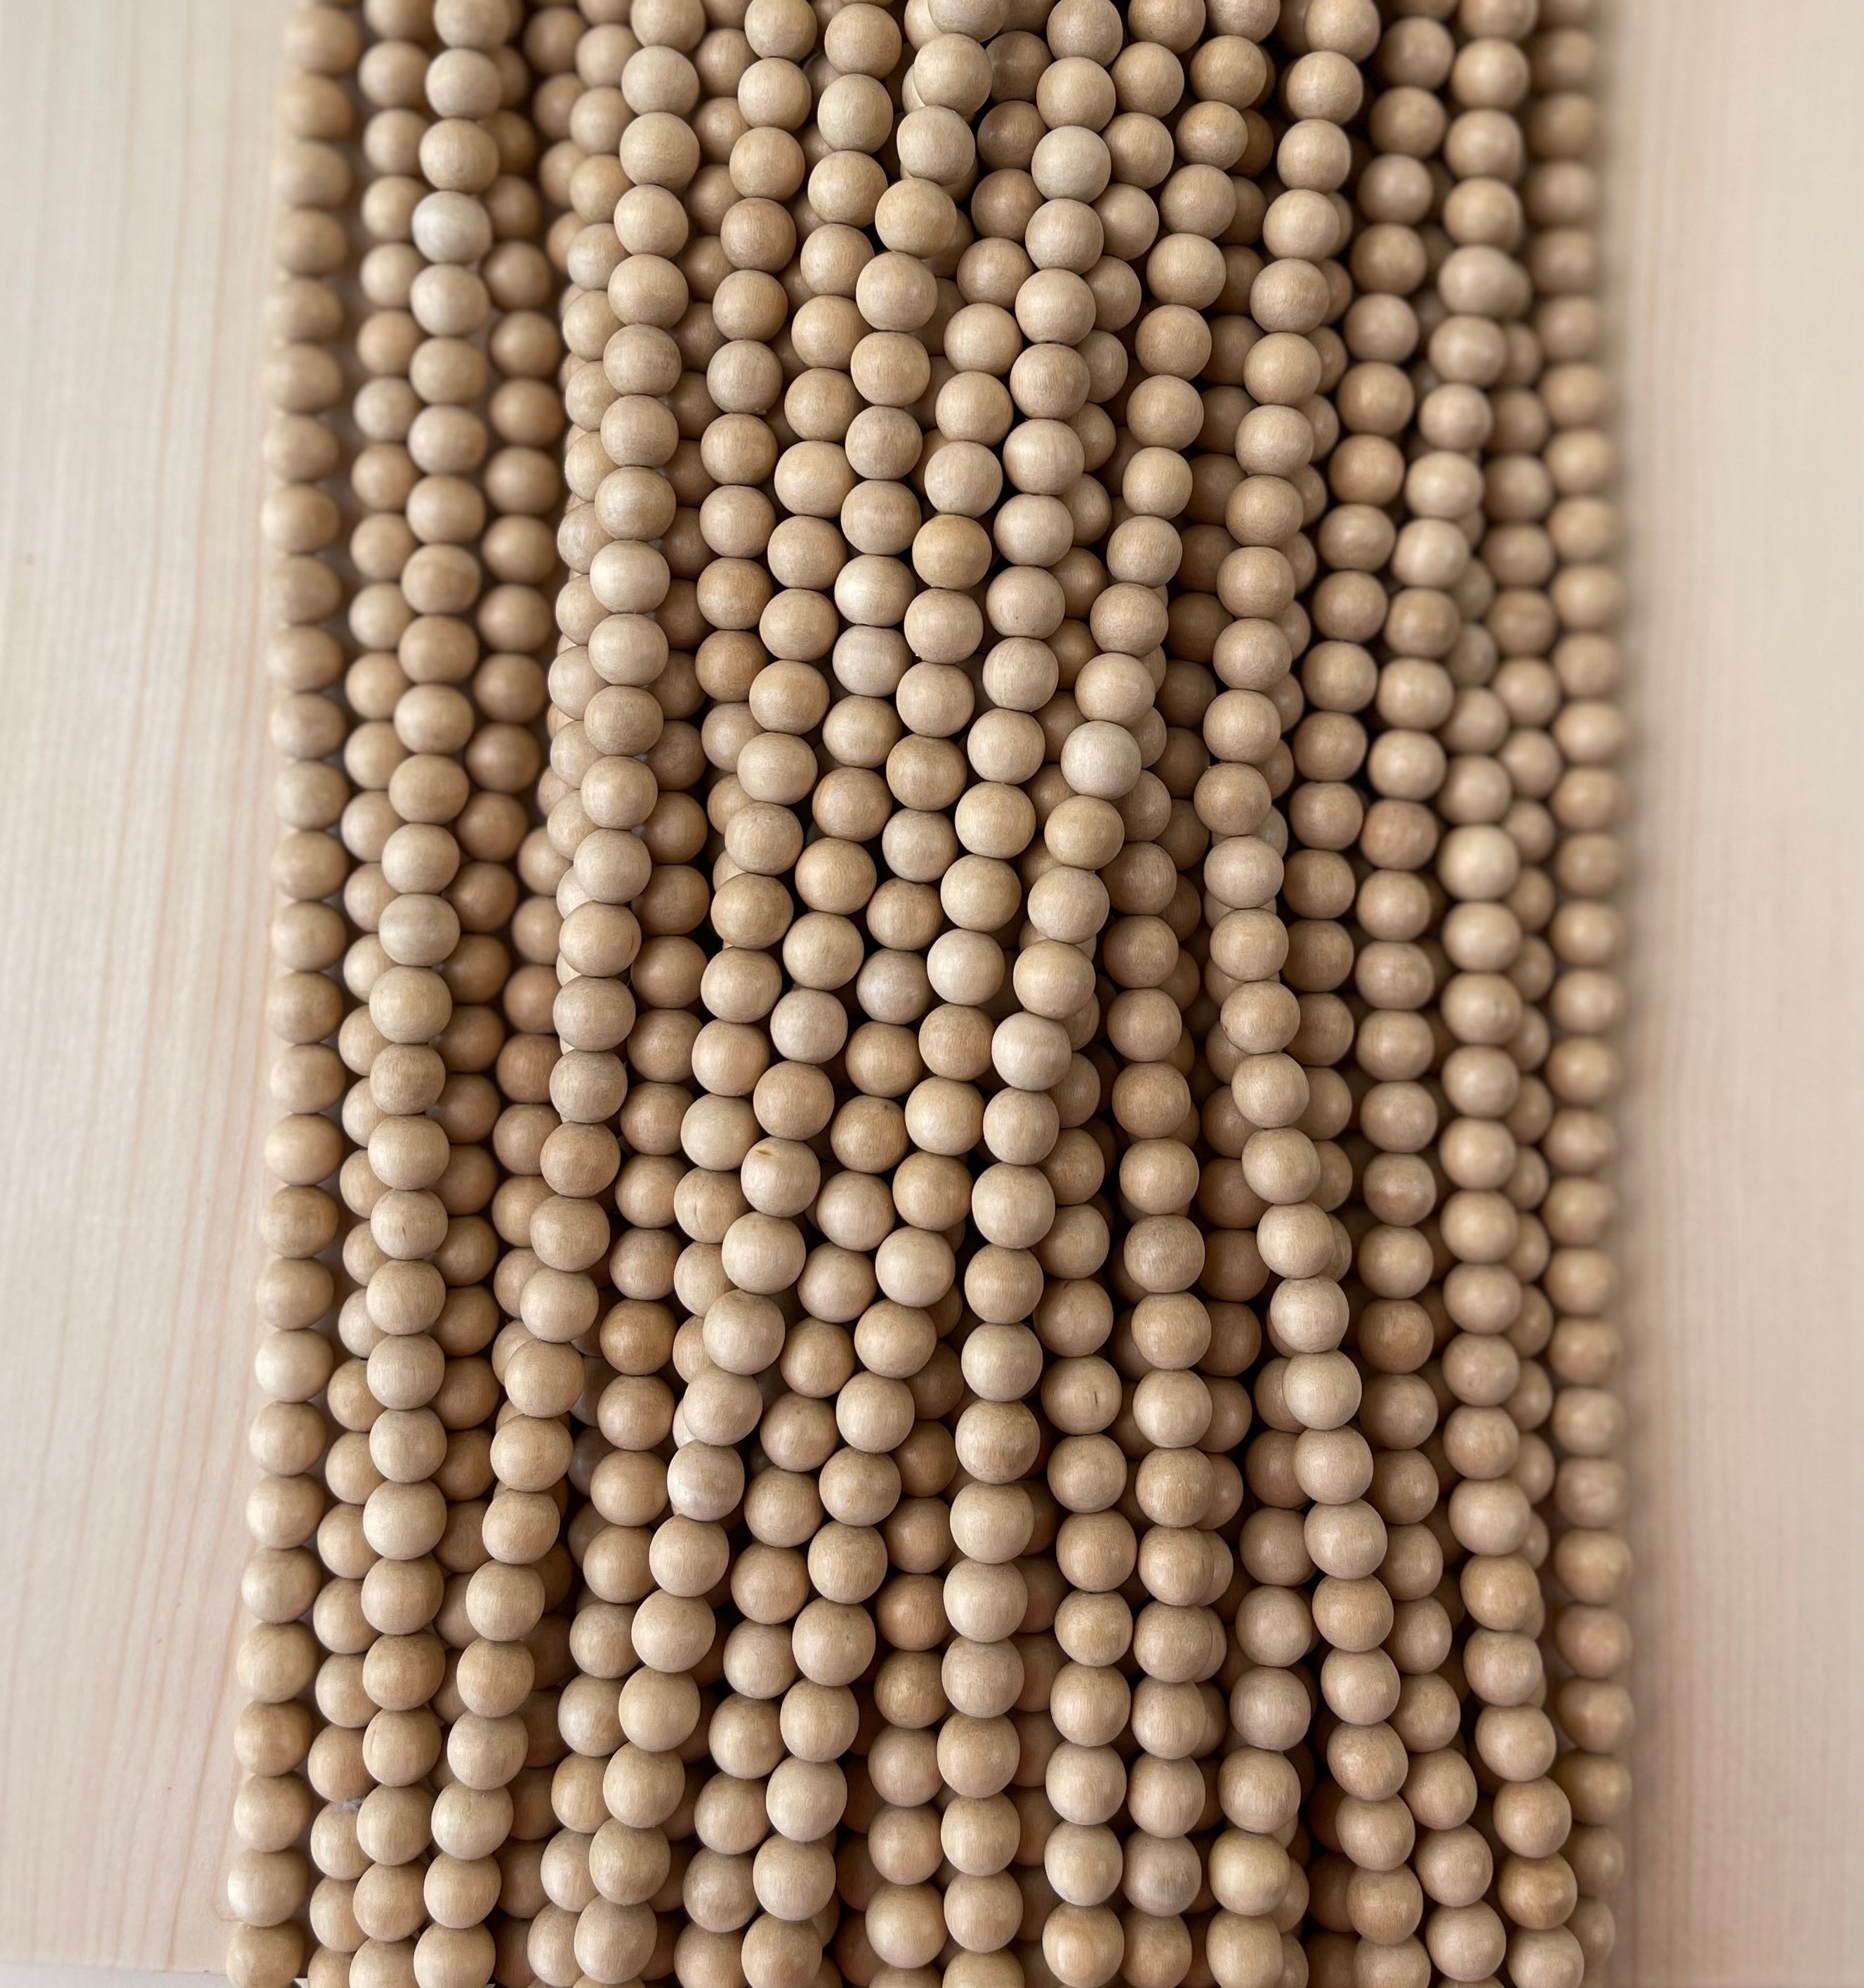 200 Wooden Macrame Beads in Assorted Natural Colors 17mm x 14mm with 8mm  Large Hole